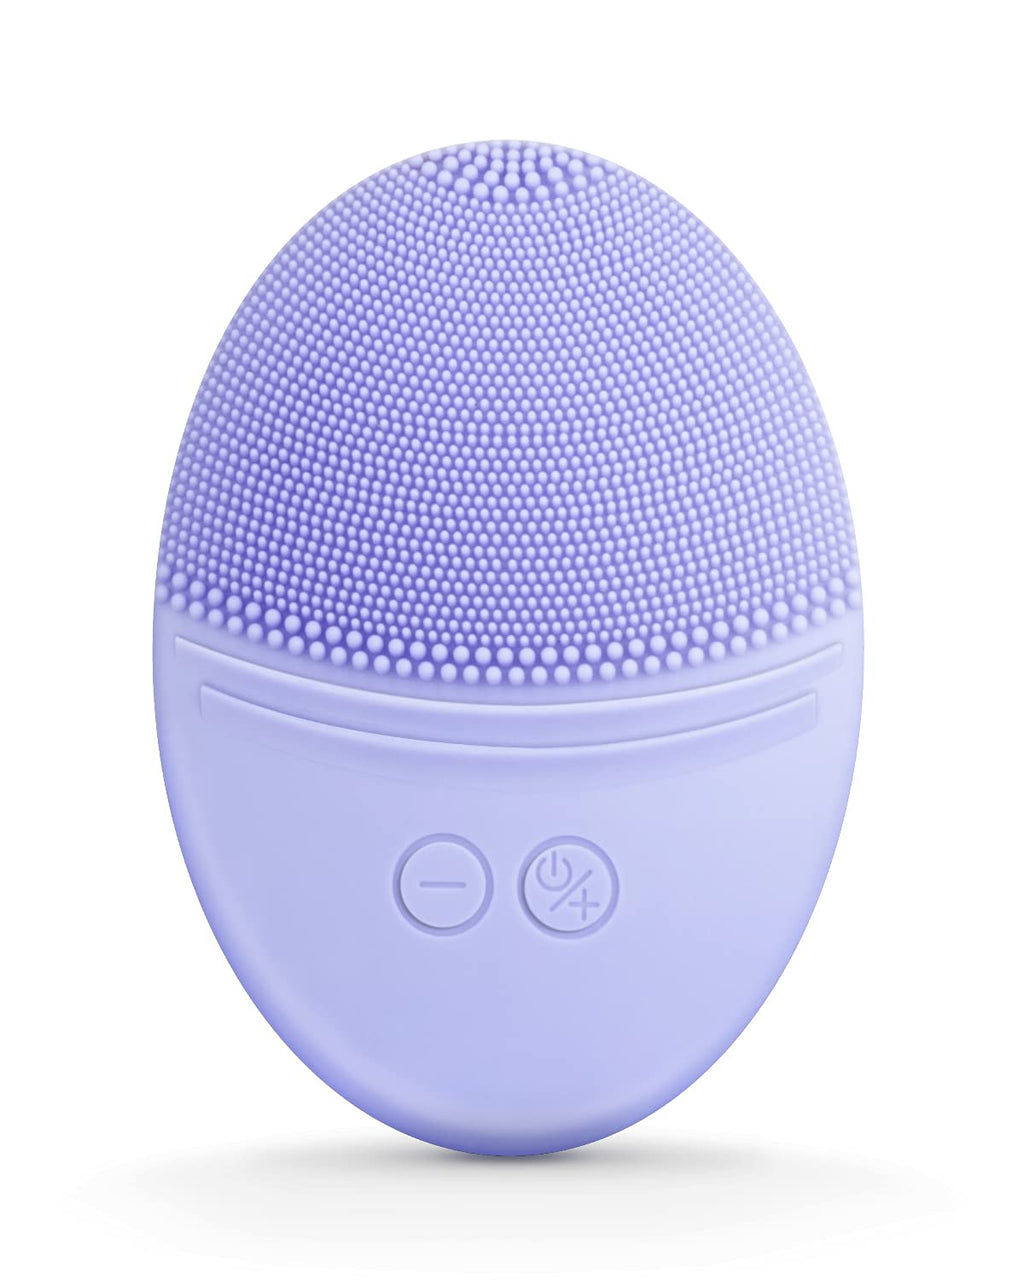 [Australia] - EZBASICS Facial Cleansing Brush made with Ultra Hygienic Soft Silicone, Waterproof Sonic Vibrating Face Brush for Deep Cleansing, Gentle Exfoliating and Massaging, Inductive charging (Violet) Violet 